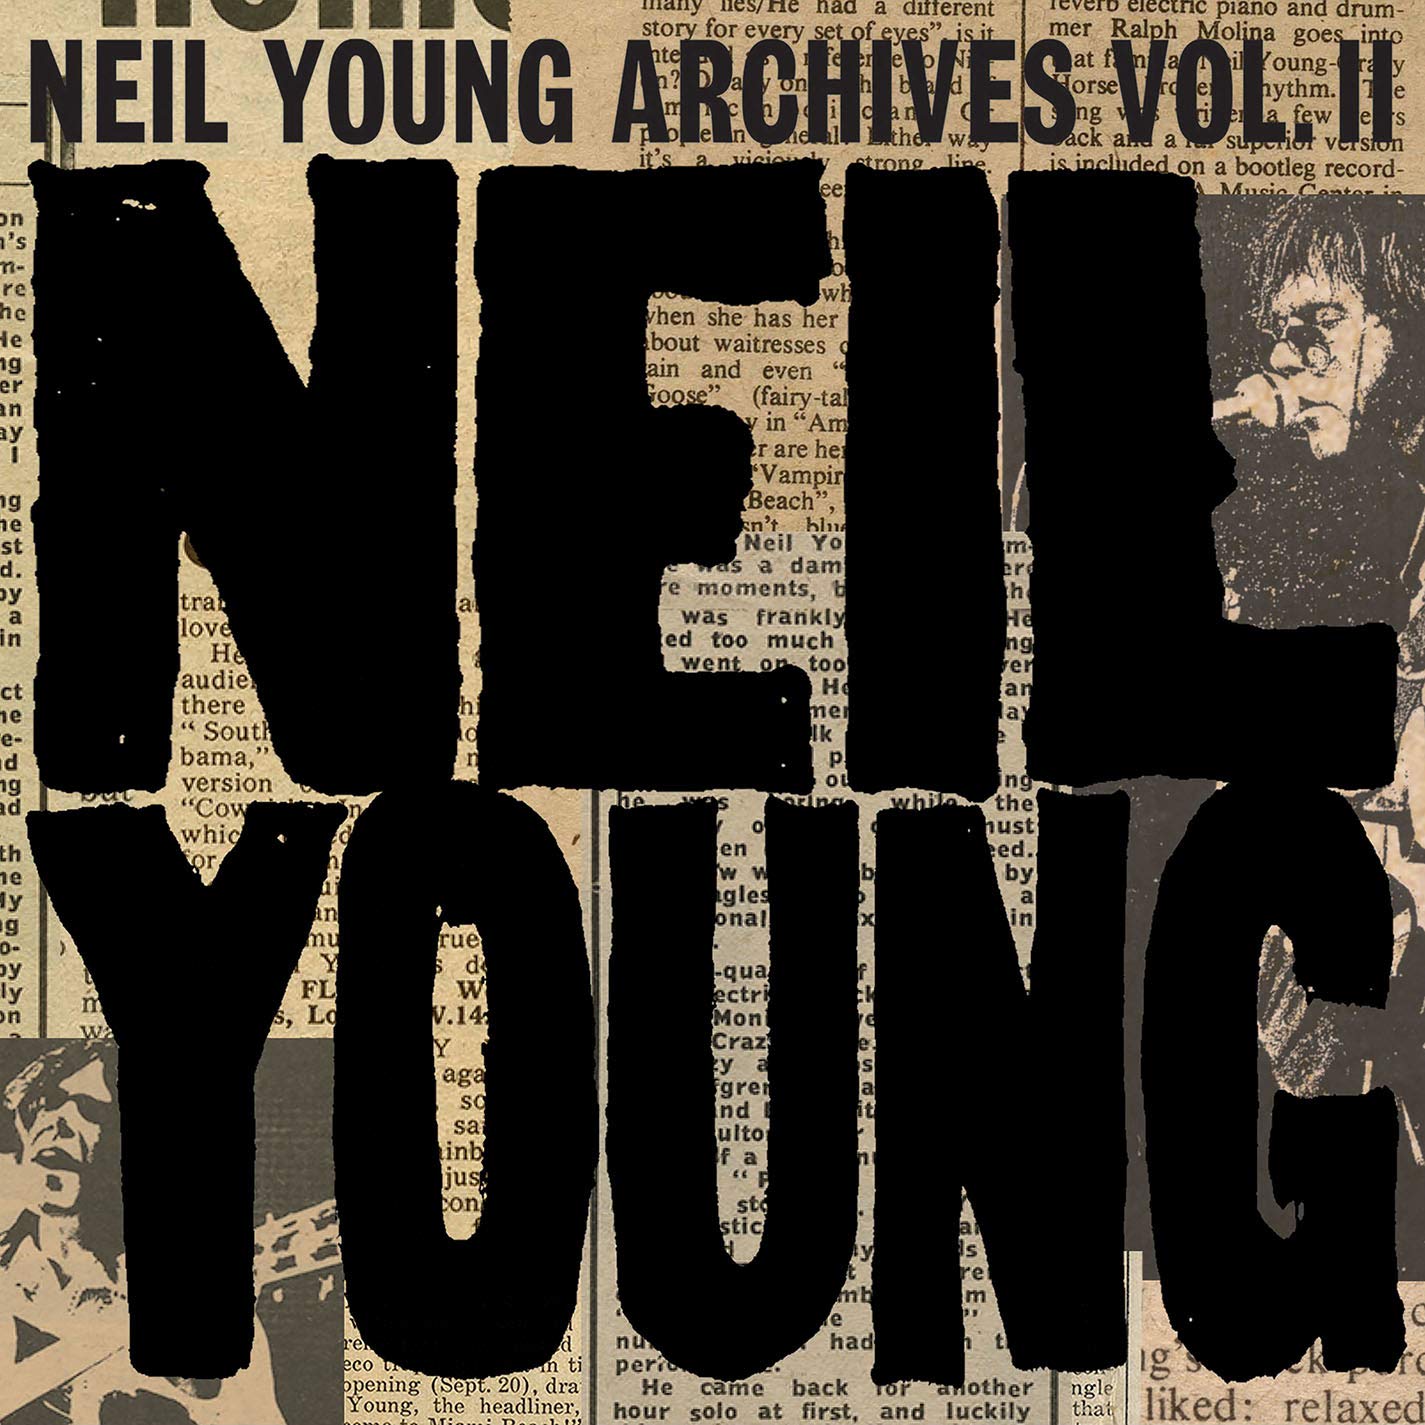 Neil Young / Archives Vol II second edition